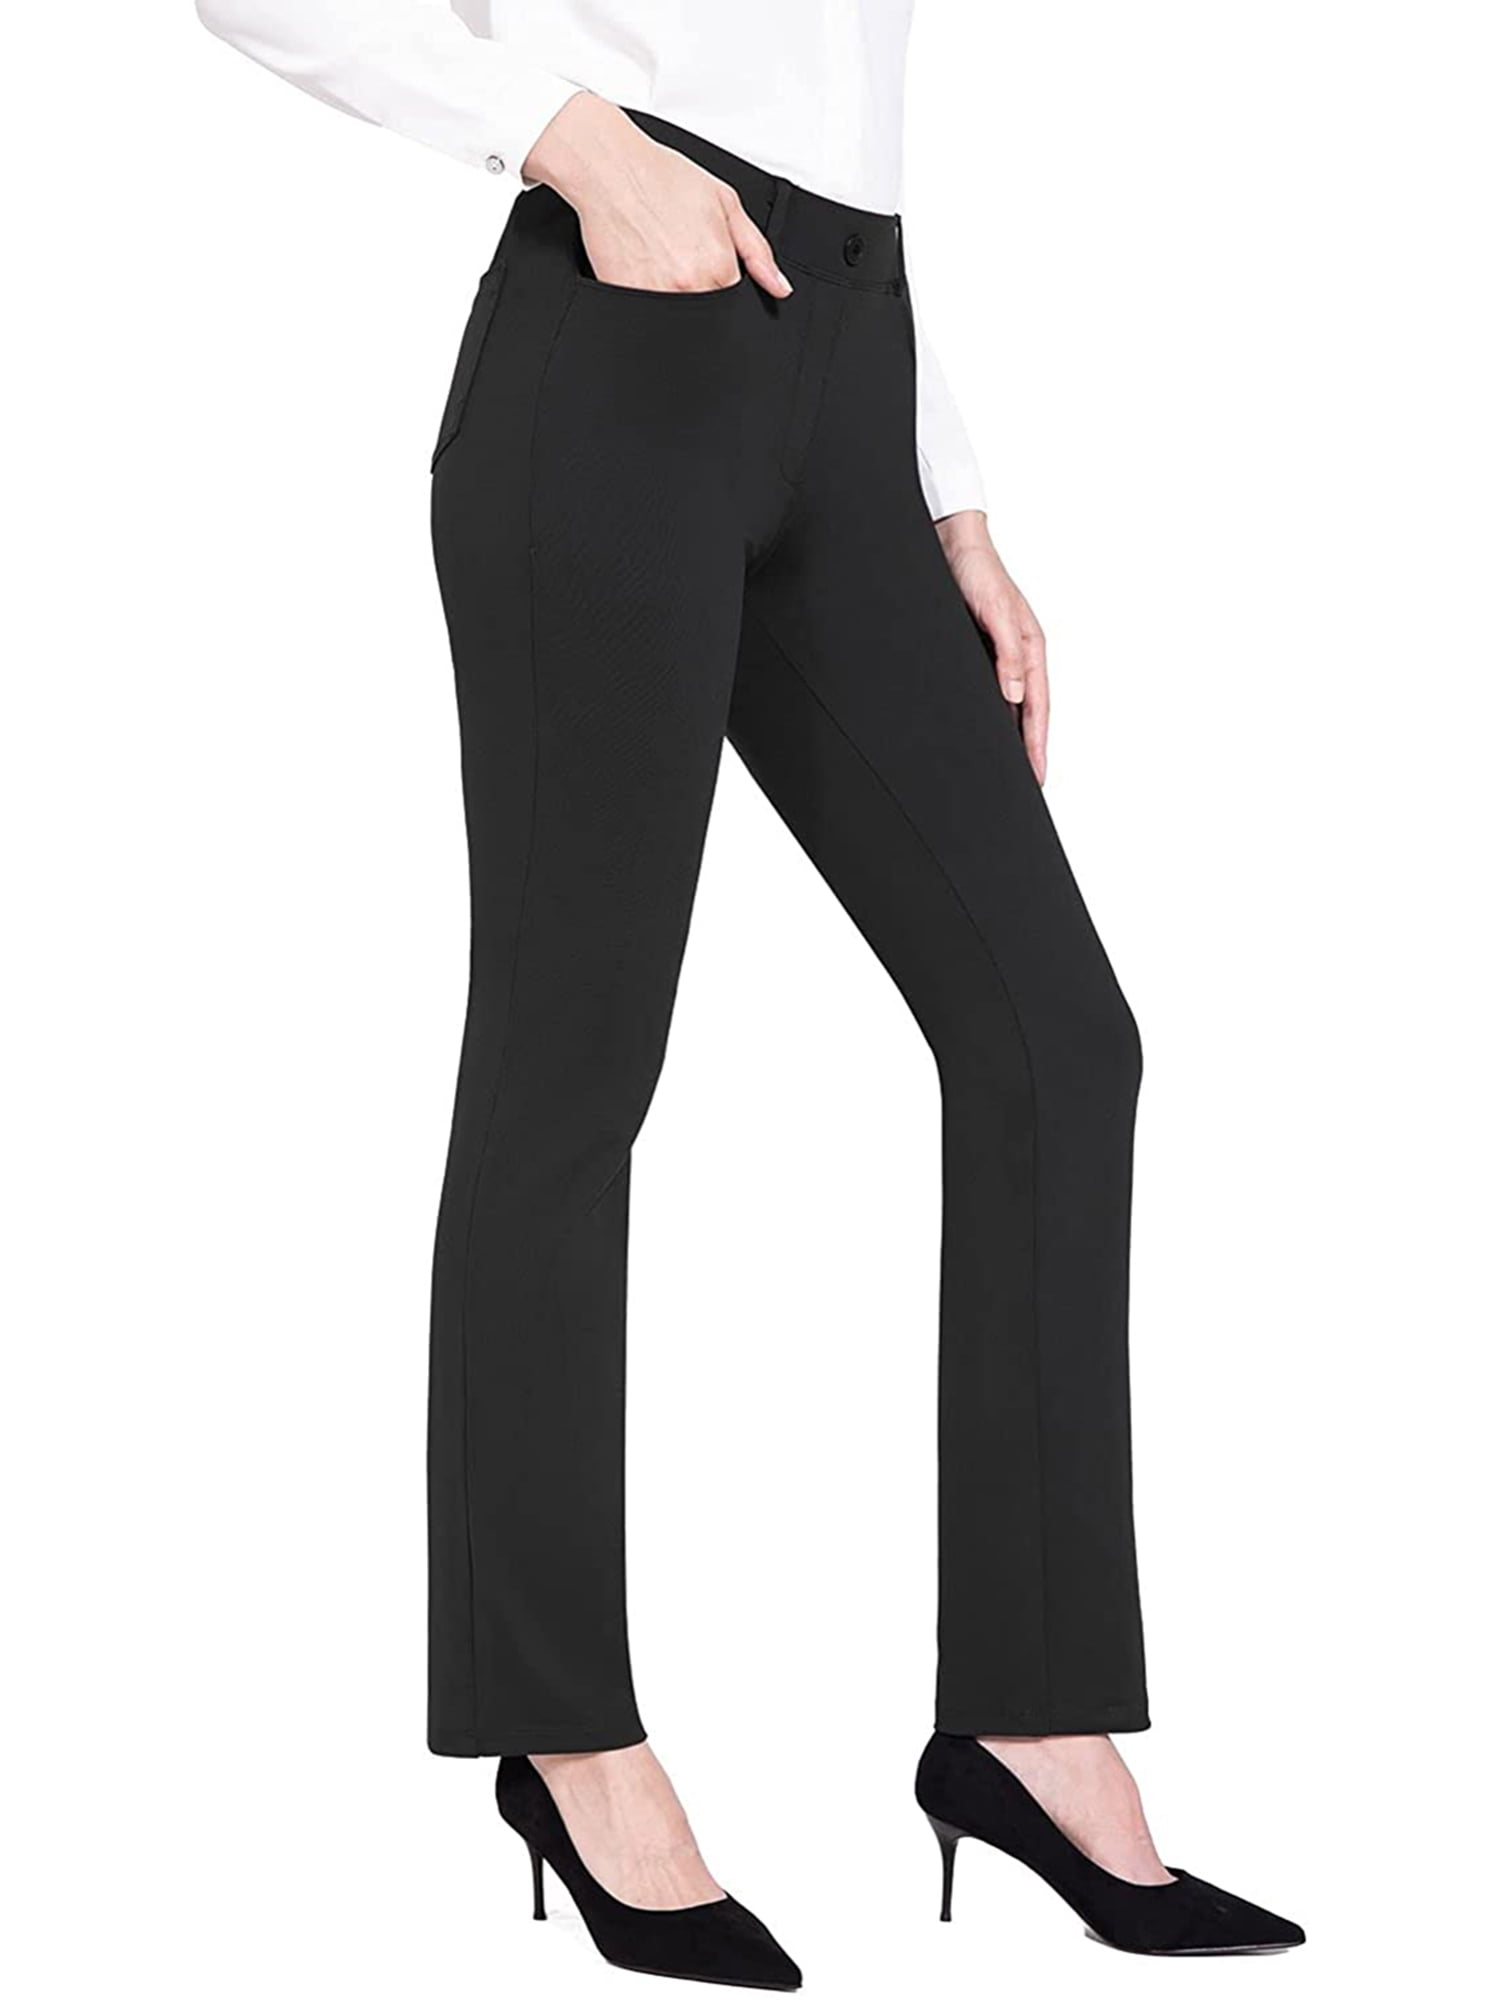 Women's Bootcut Yoga Dress Pants Pull-On Stretch Work Business Casual ...